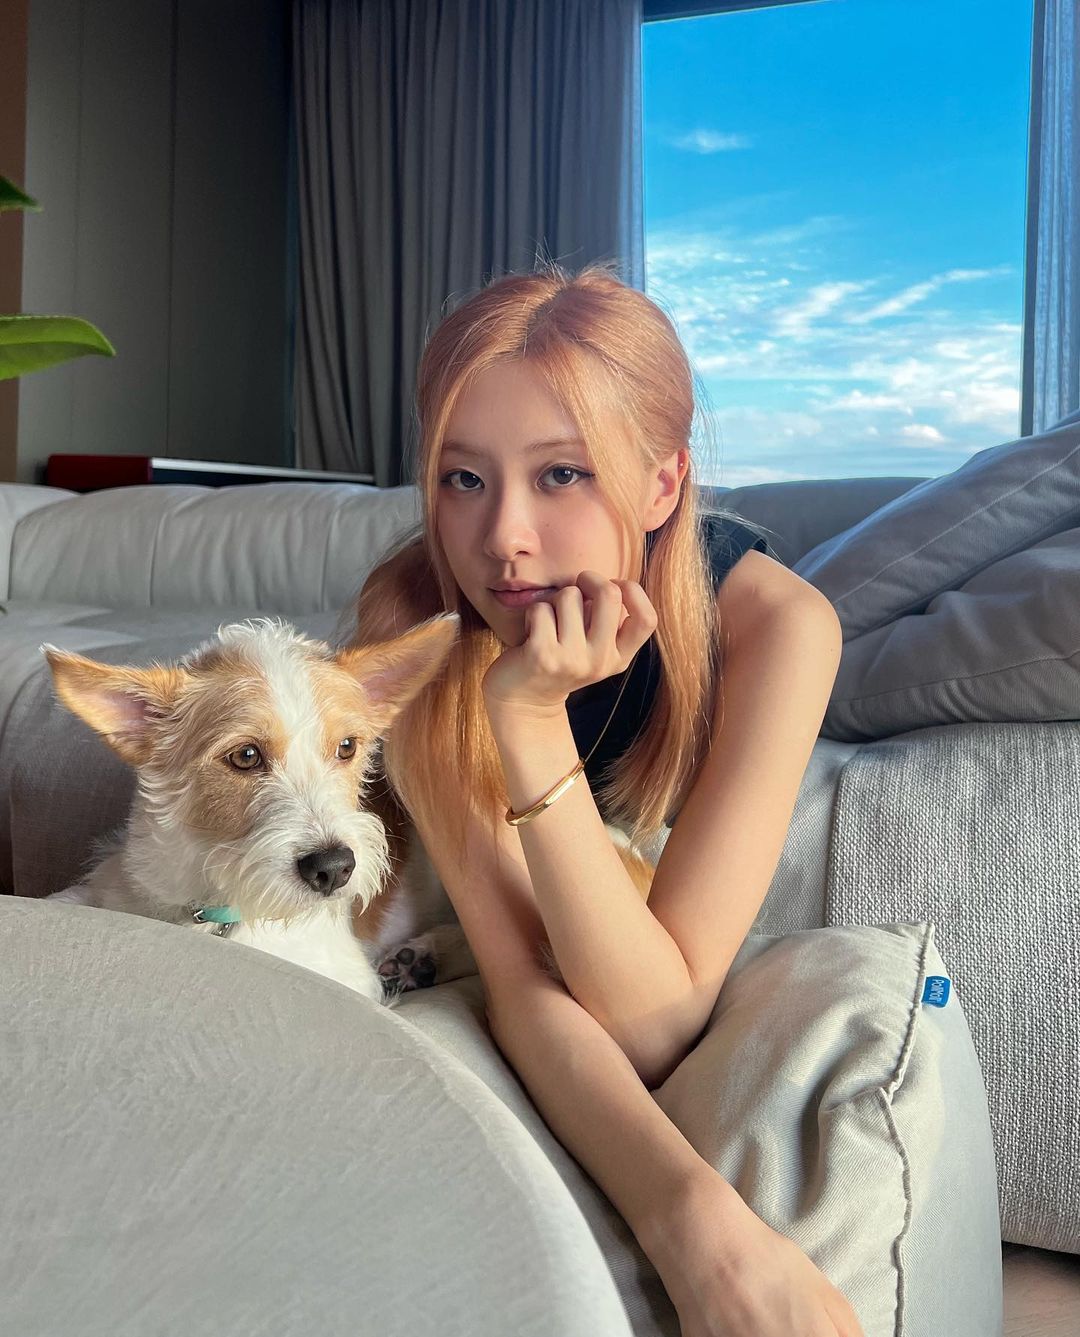 Rosé, a peaceful daily life with a dog.. Daily life is a pictorial